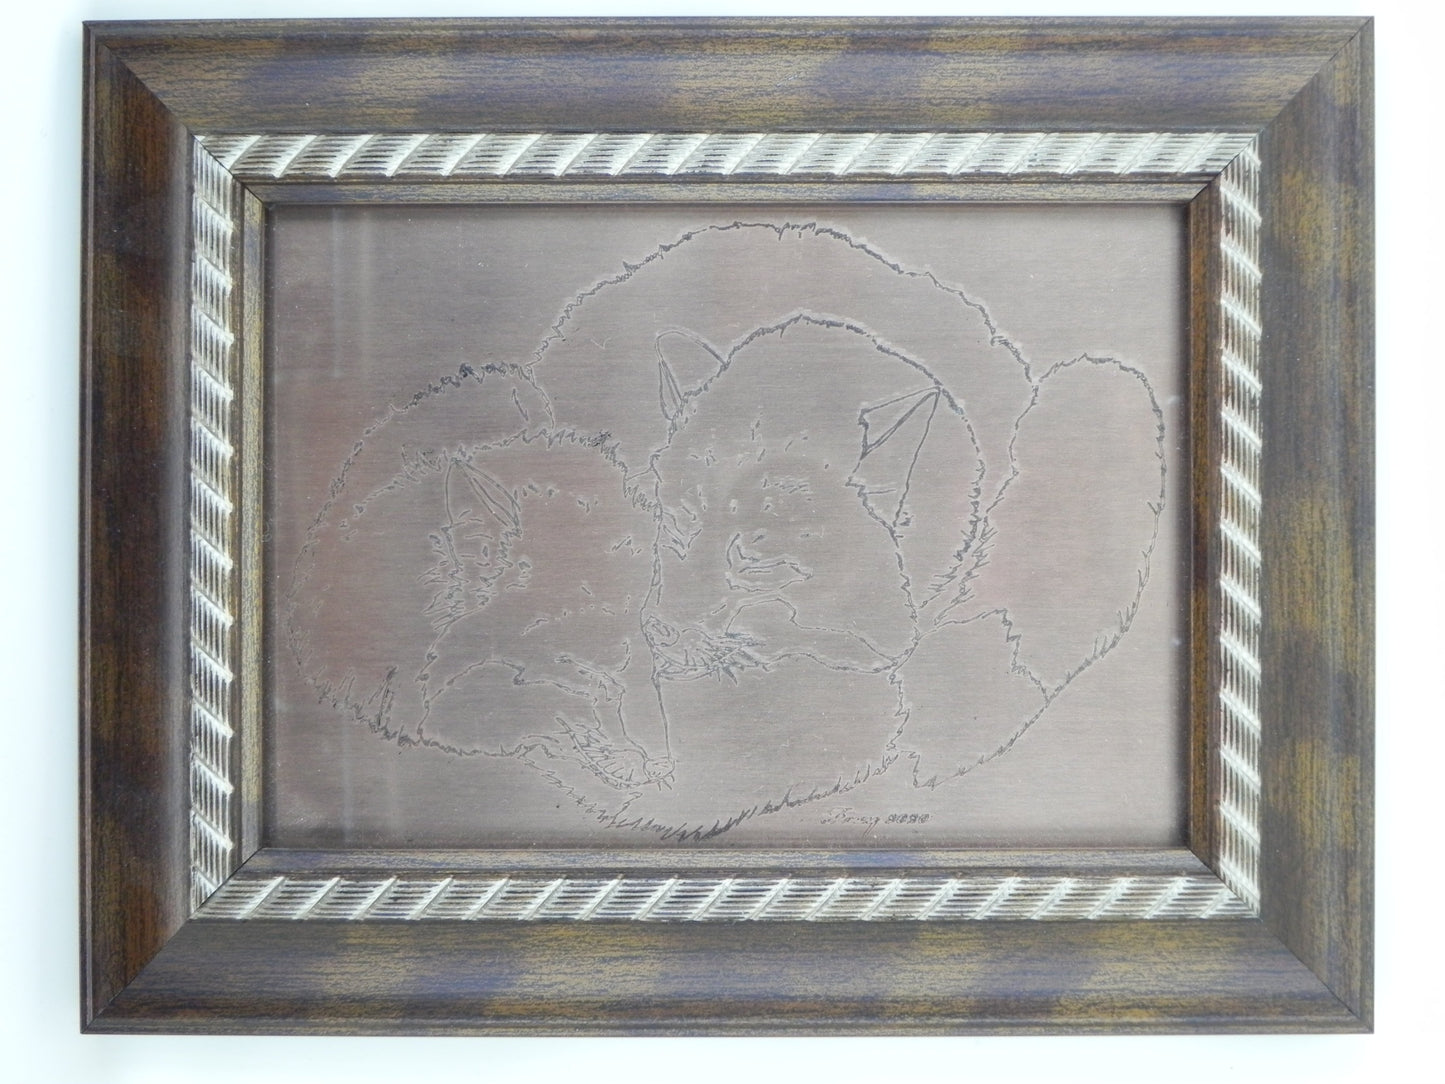 "Snuggling Foxes" engraved copper plate